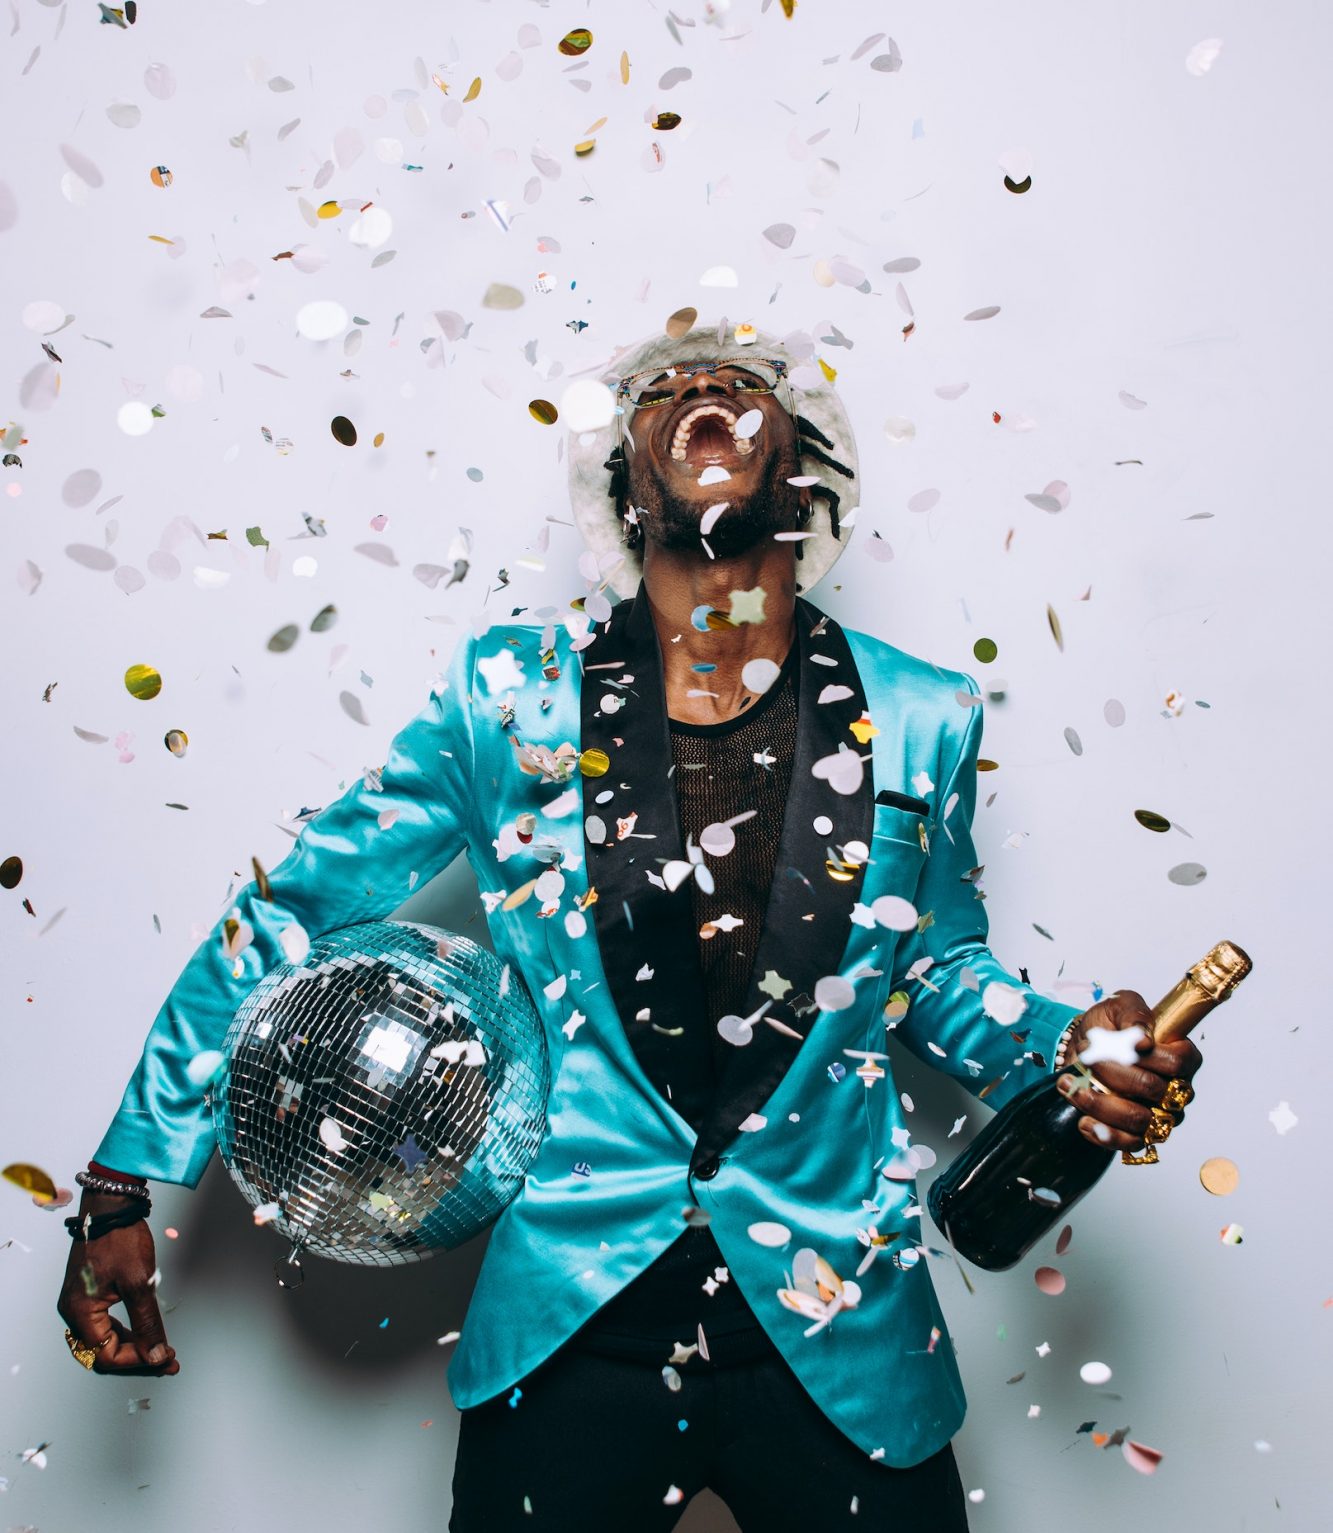 Portrait of an hip hop music performer with confetti drop